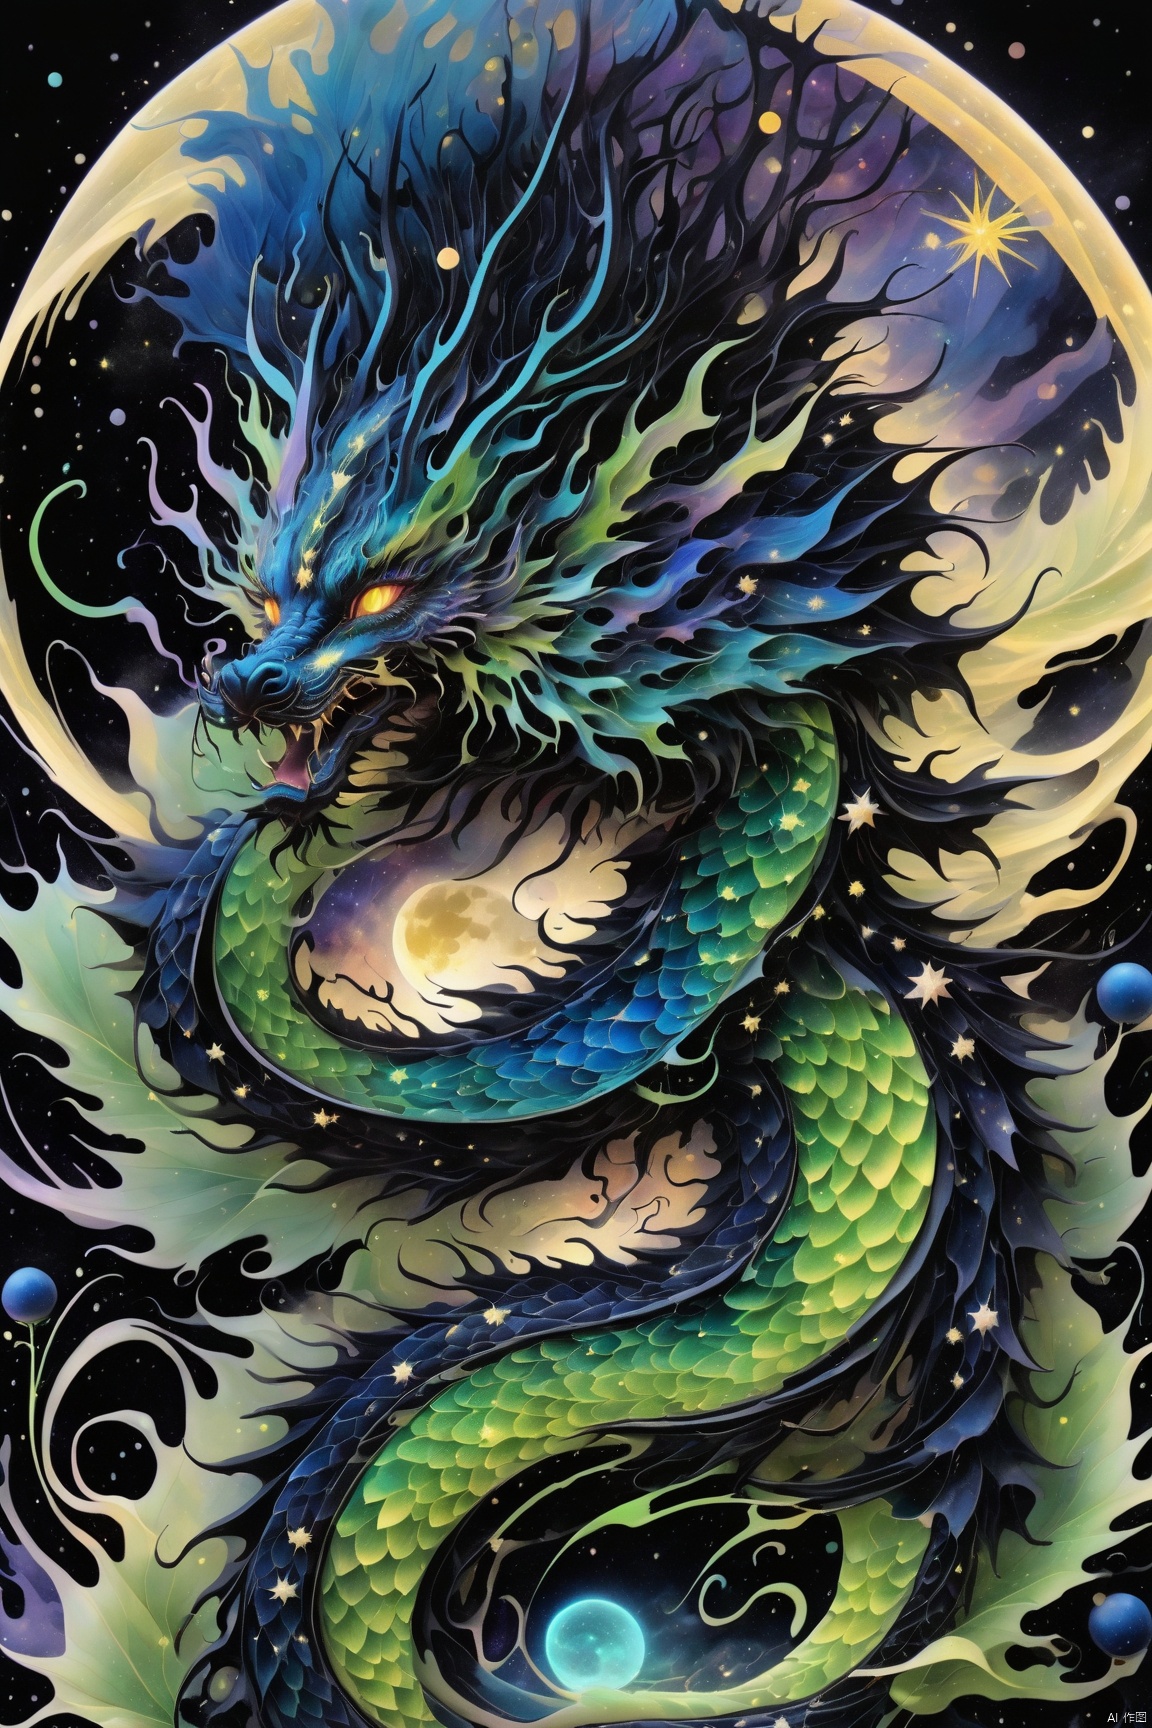  （The mythical Chinese dragon：1.24）,epic, black, neon green, blue, thin lines, x-ray effect, threads, fairytale landscape, hyperrealism, micro-details, surreal, detailing, transparent watercolor+ink, pastel shades, clear outline, stardust, incredible beautiful landscape, dark botanical,dark fantasy,multicolor,multilayer, 3d, threads, fibers, engraving, color illustration, star map, moon, volumetric, unusual fluffy flowers, anhei